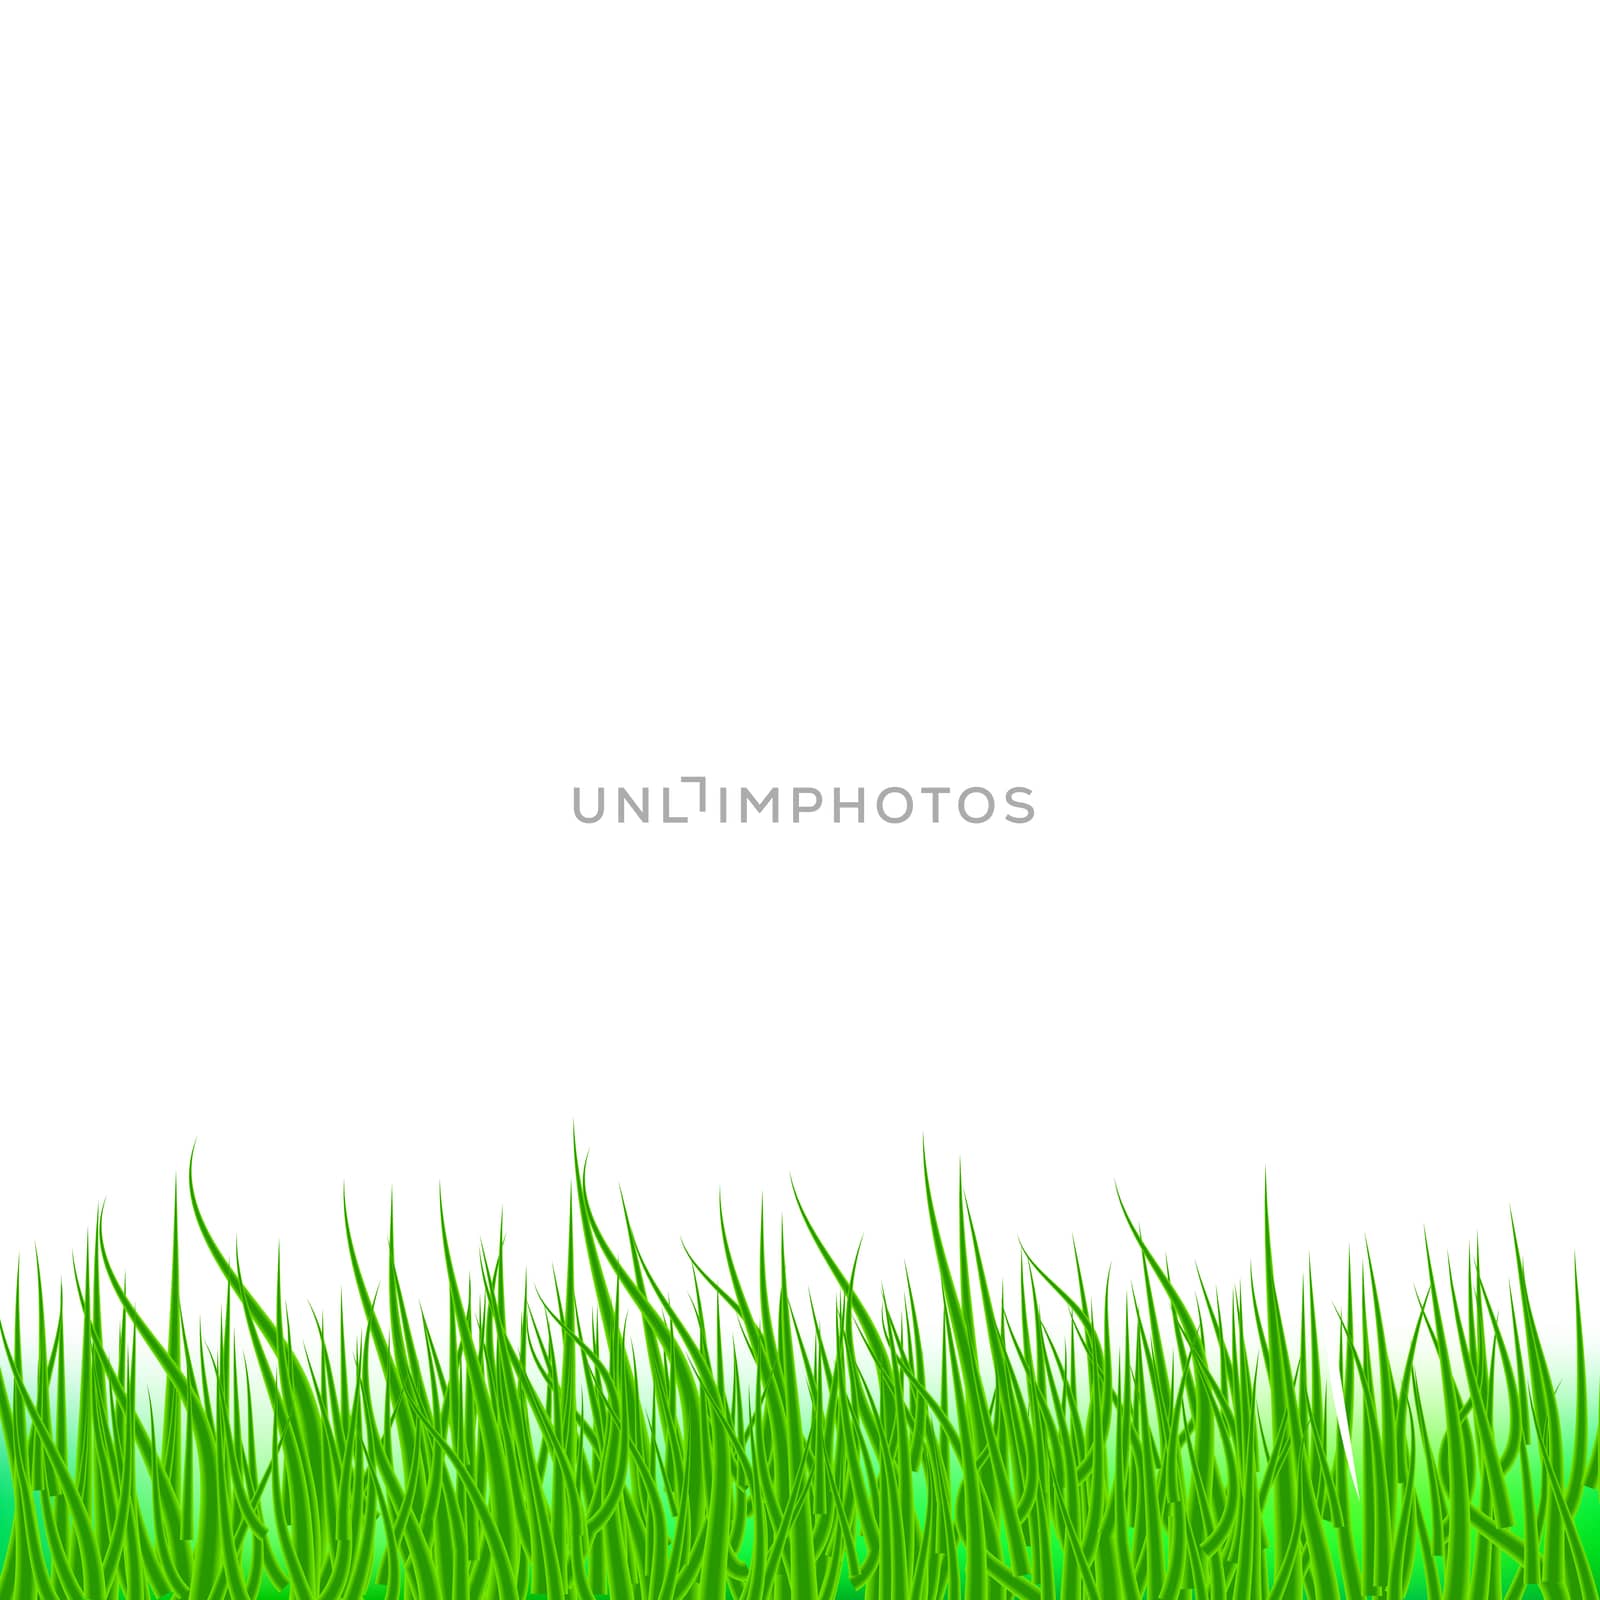 Lawn green grass abstract natural background by olegkozyrev